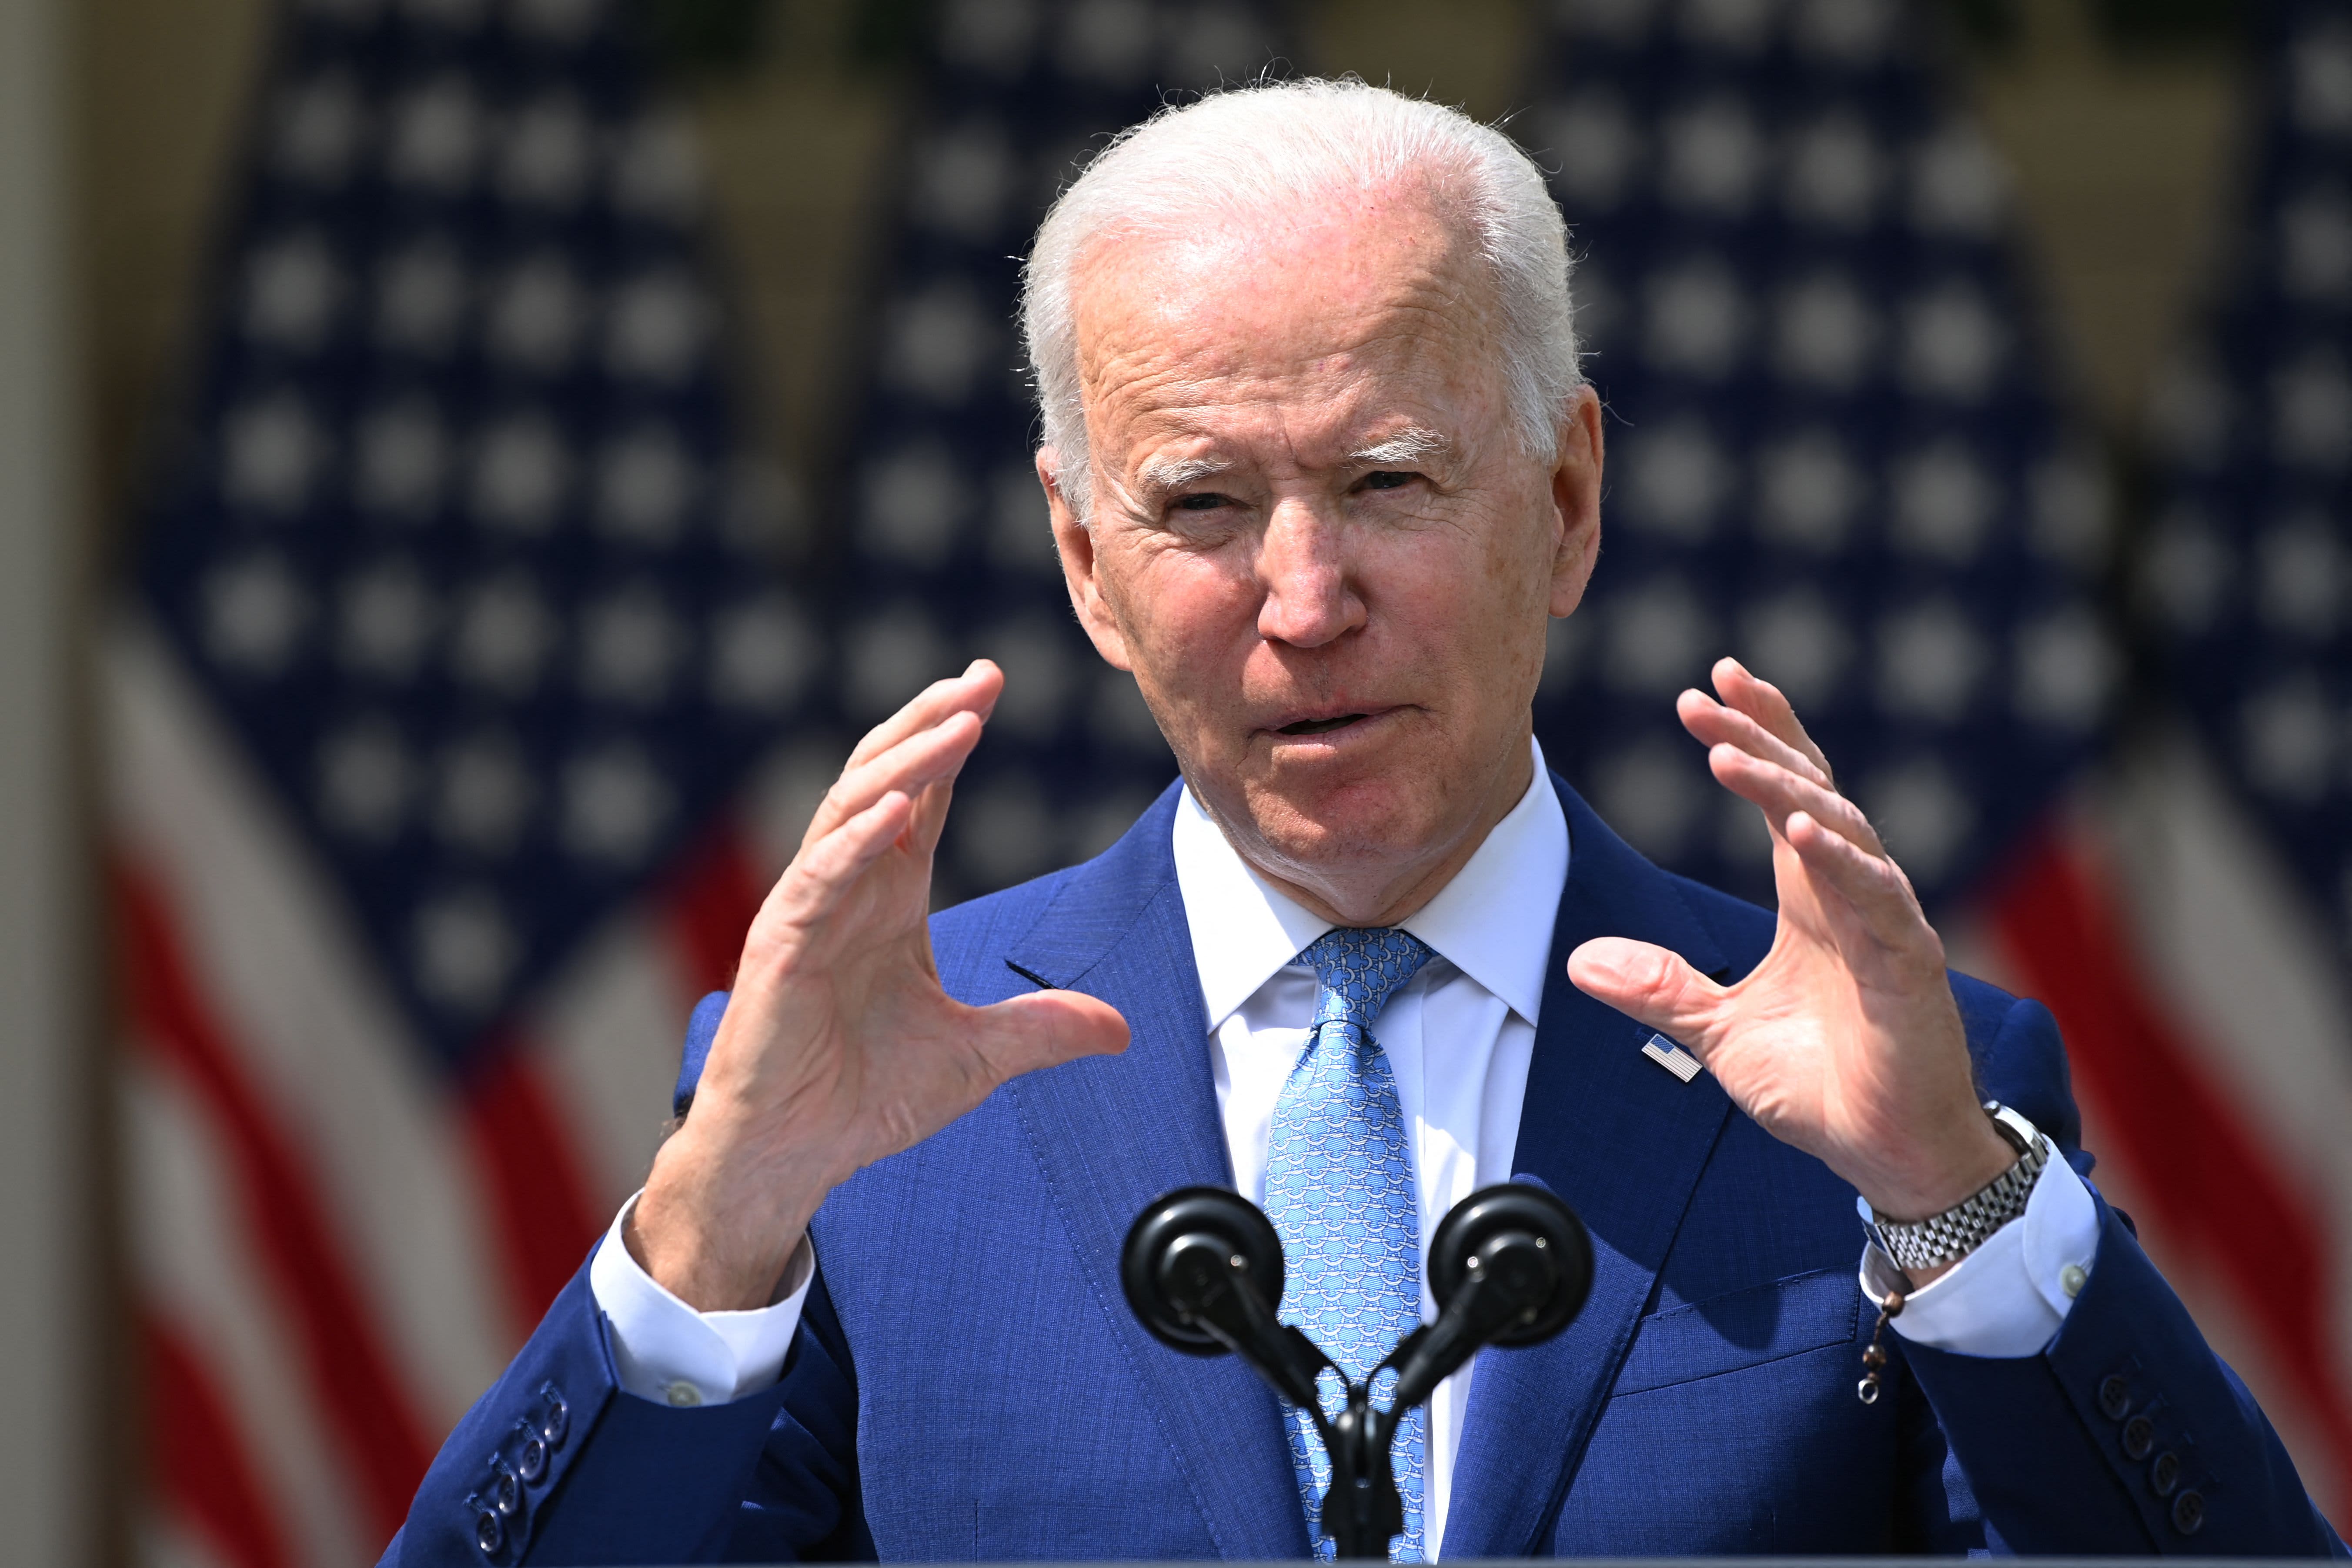 Biden says gun violence is an epidemic and calls for national law on red flags